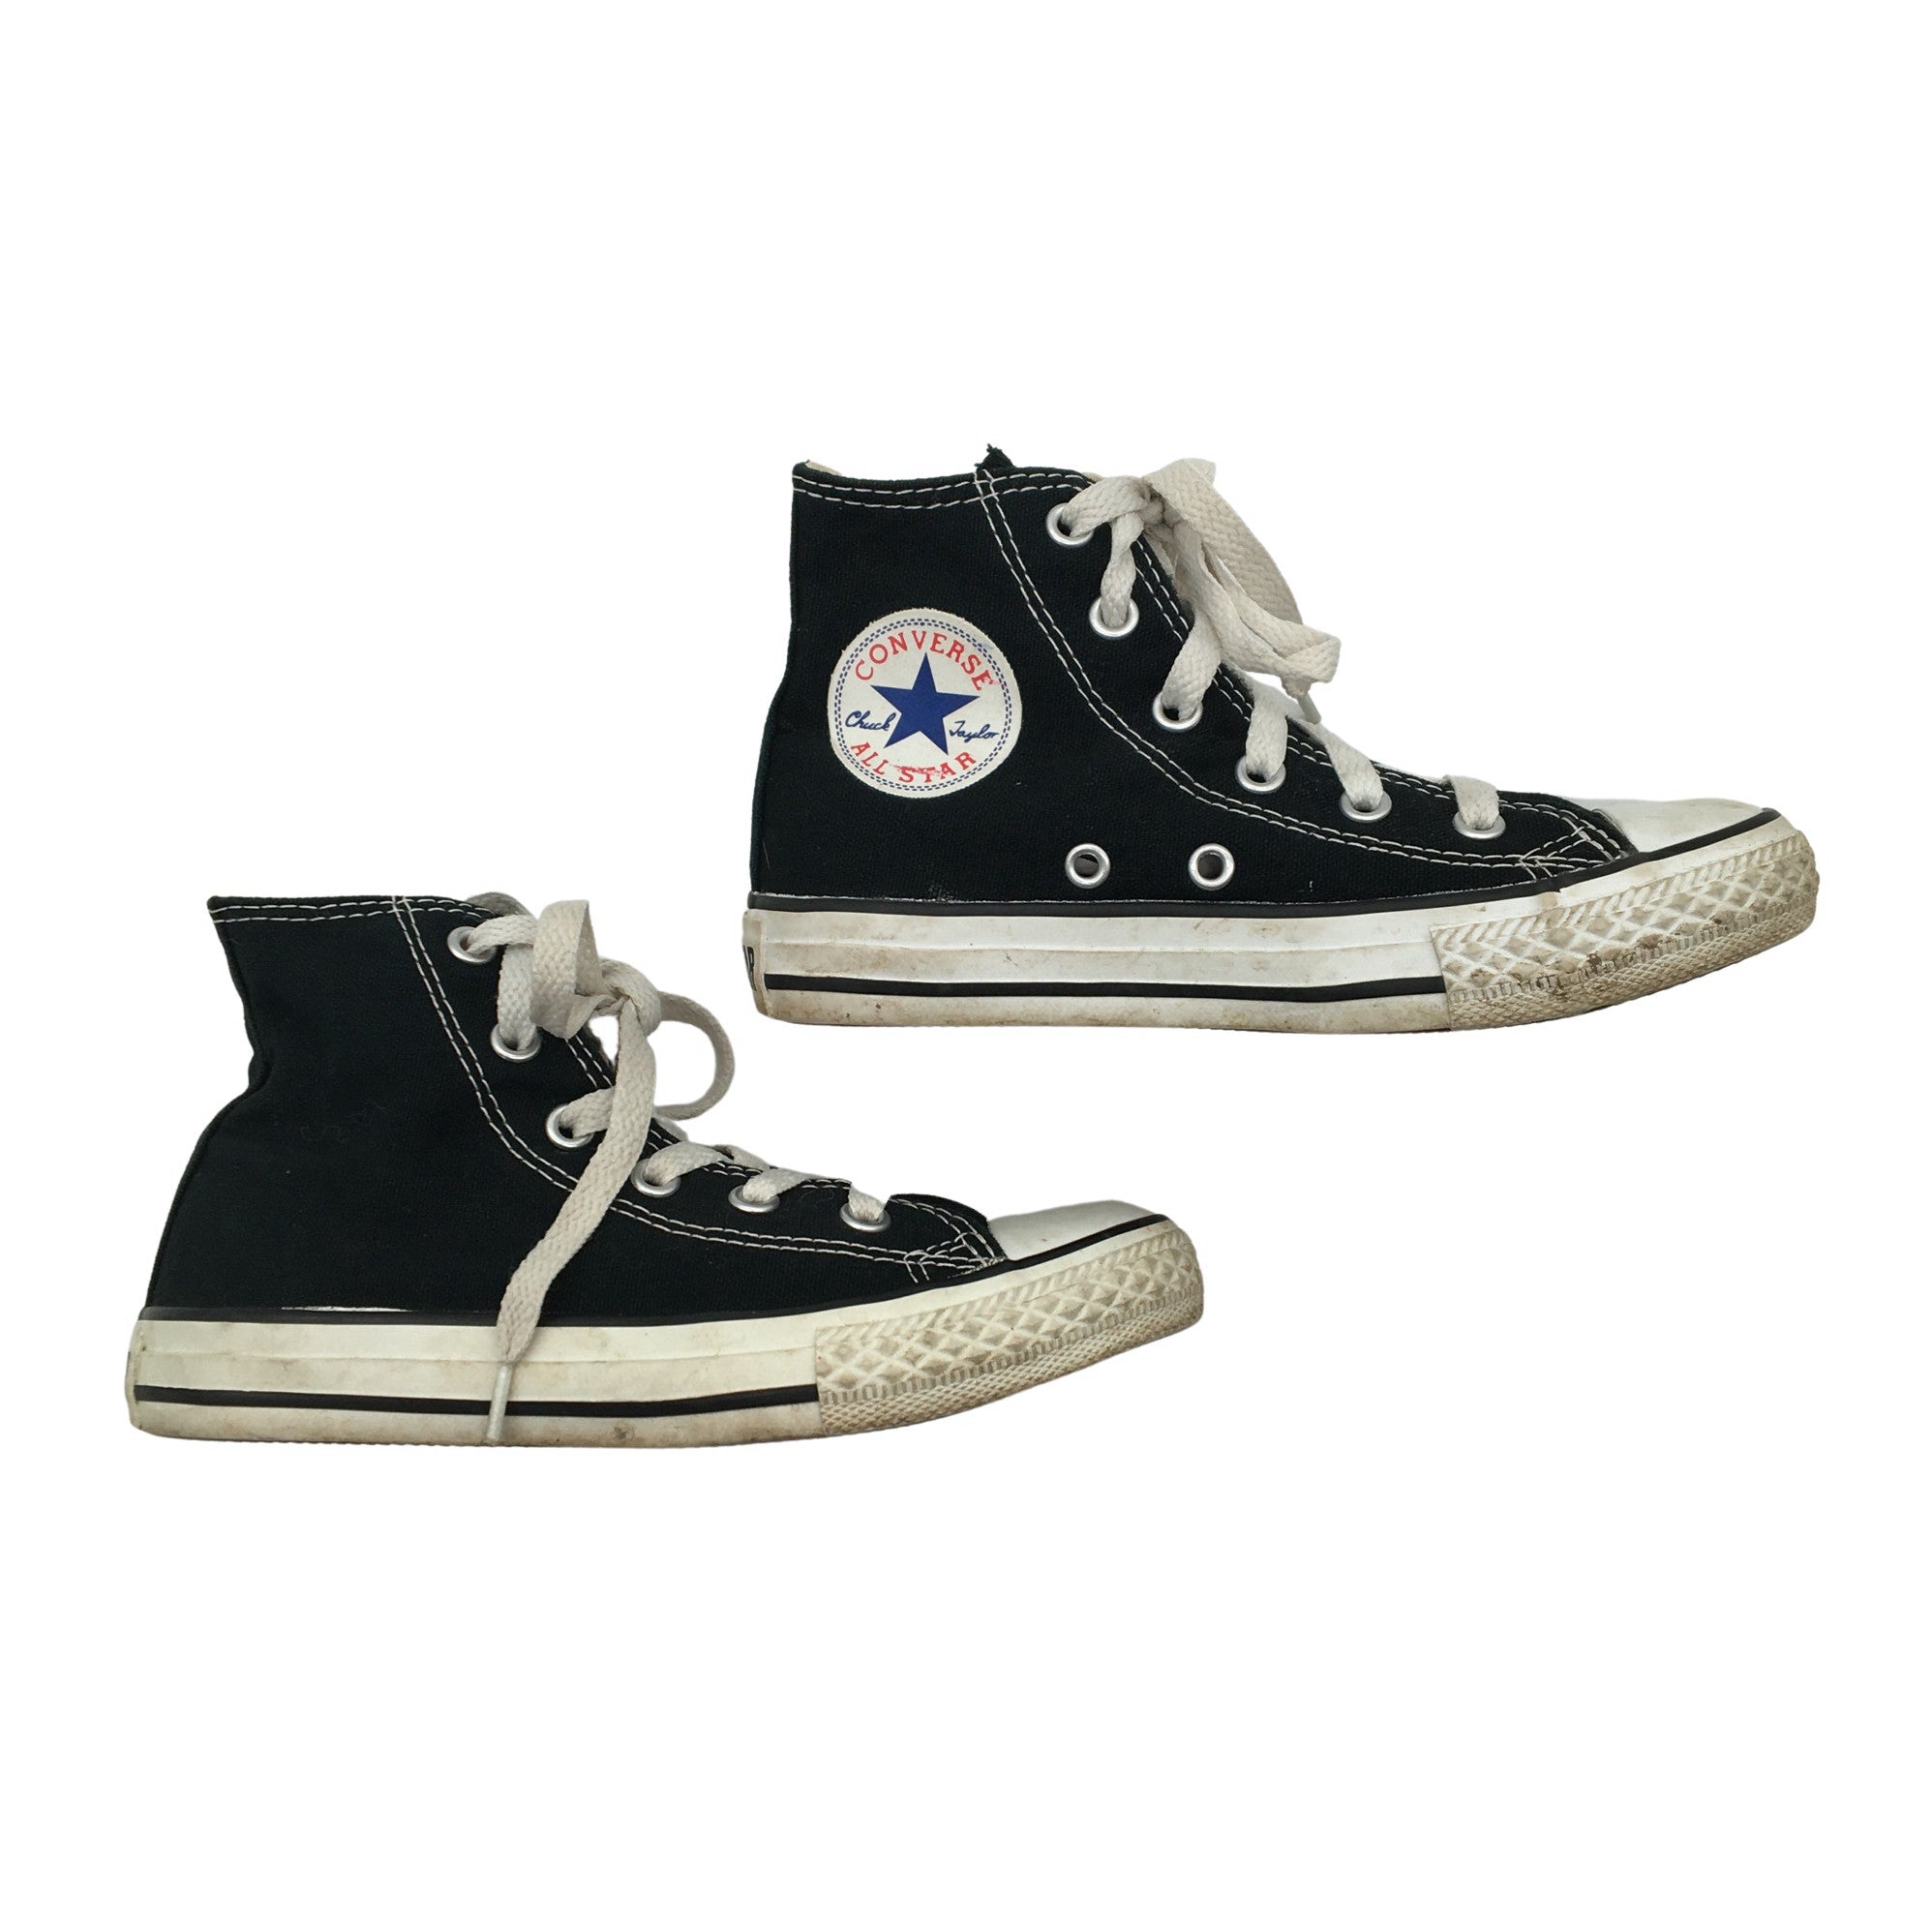 Unisex Converse sneakers, size 30 (Black) | Emmy